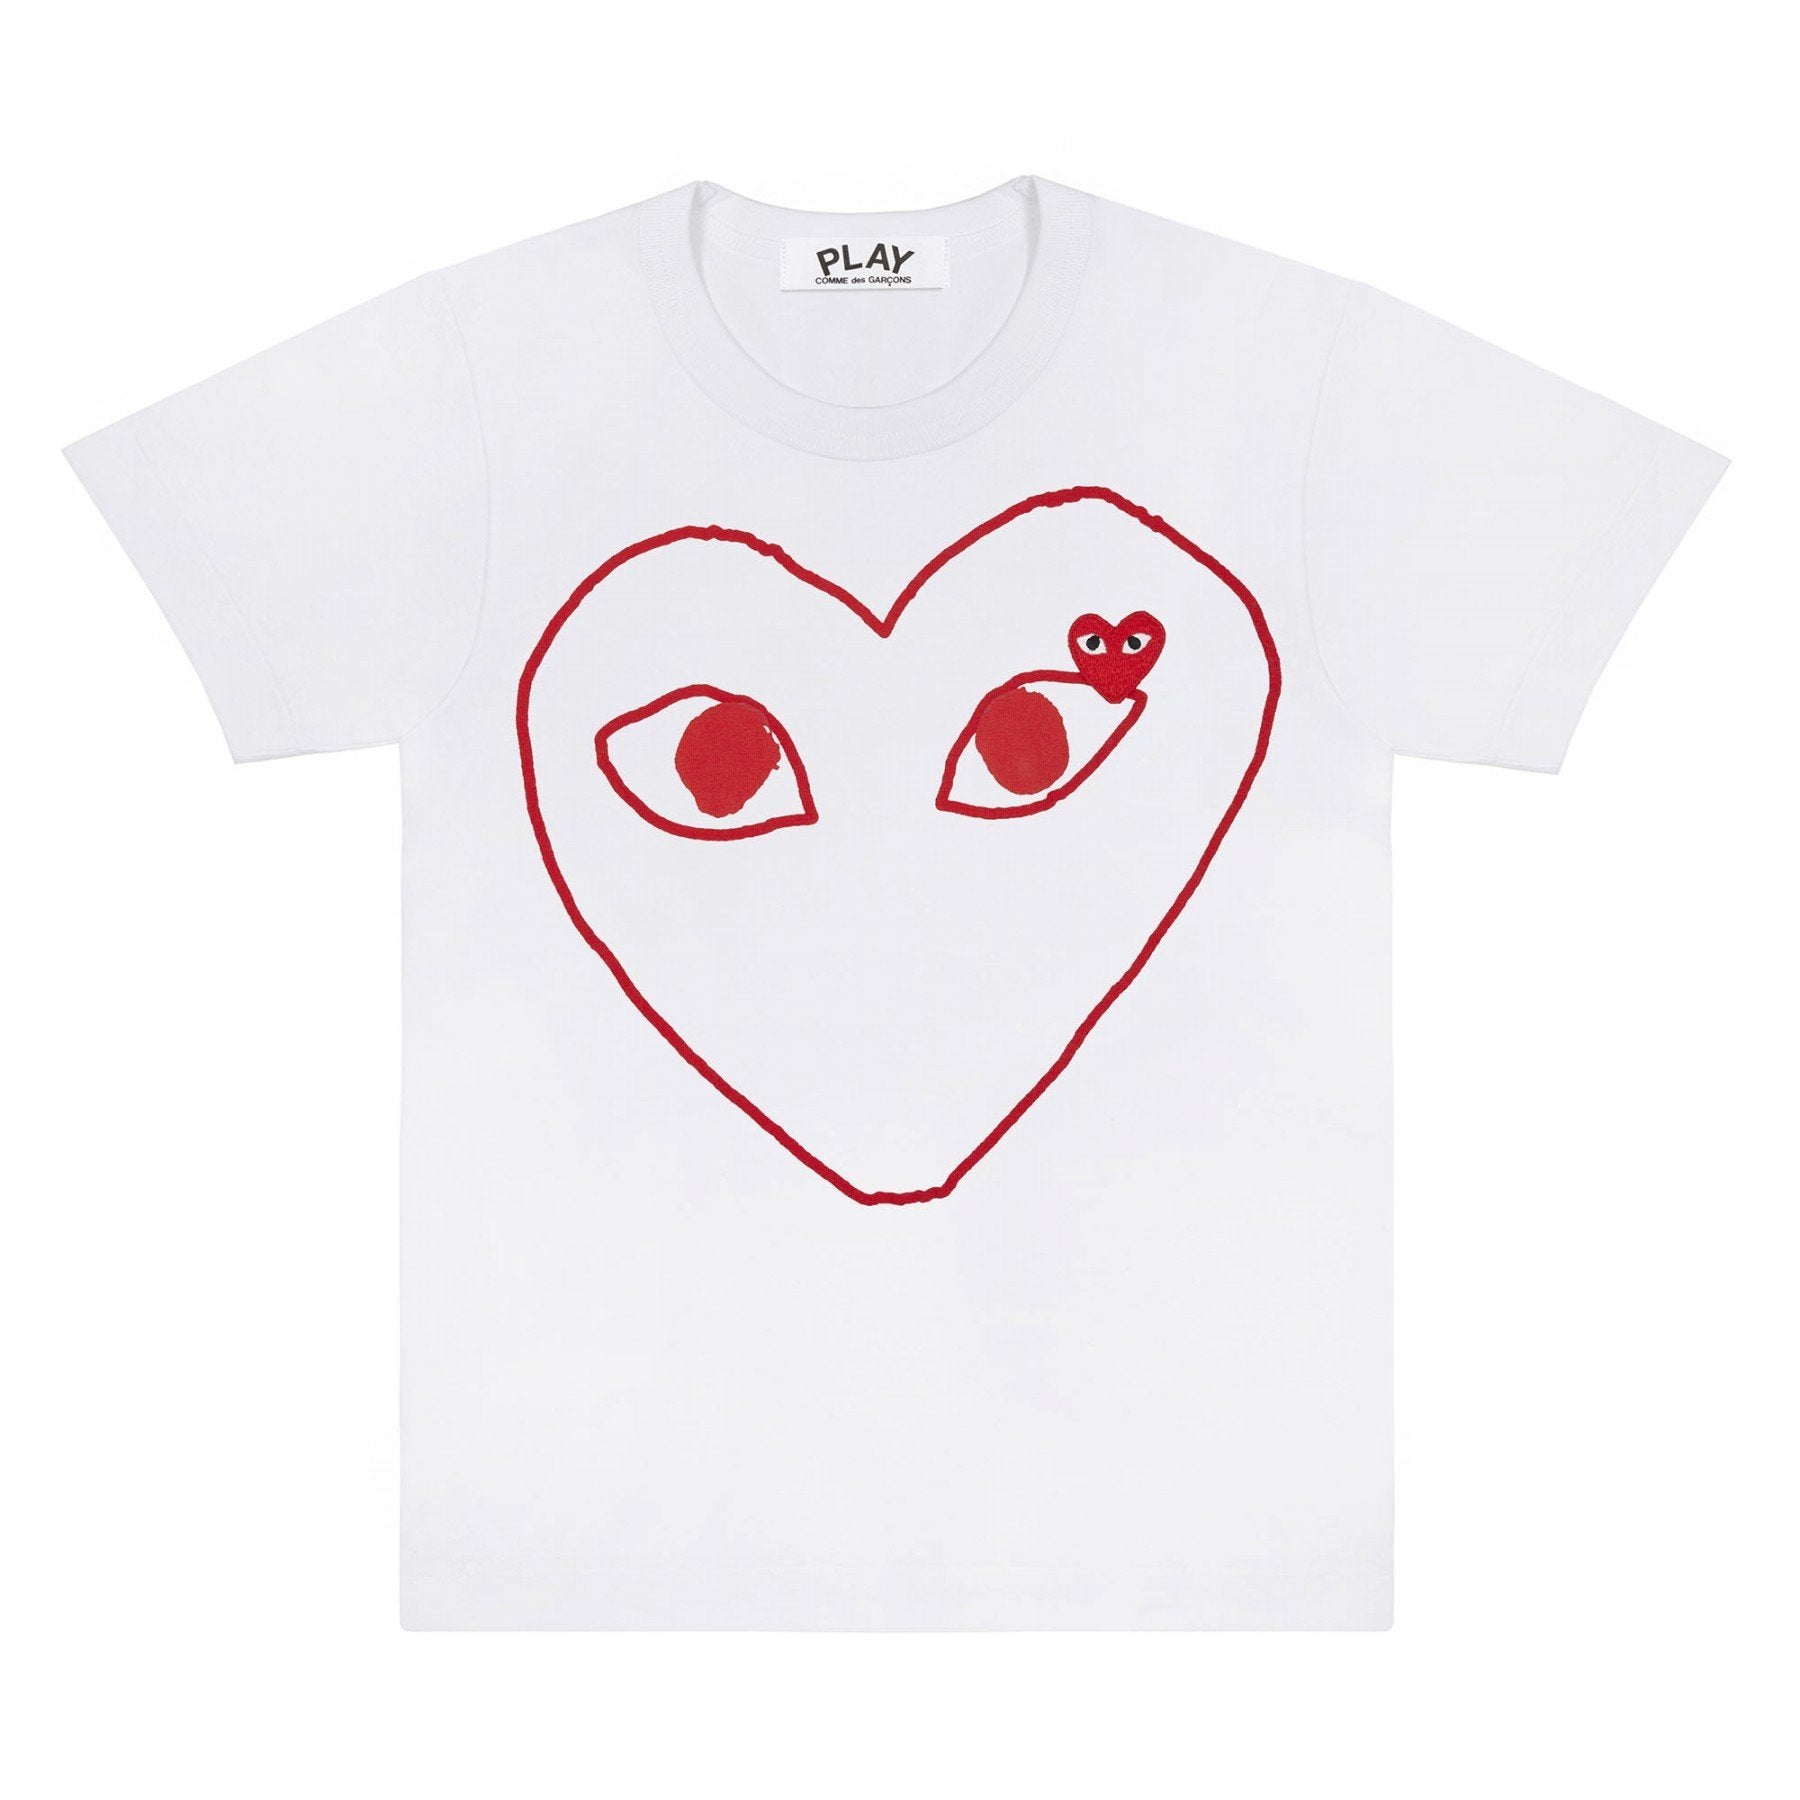 PLAY White T-Shirt with Red Outline Heart